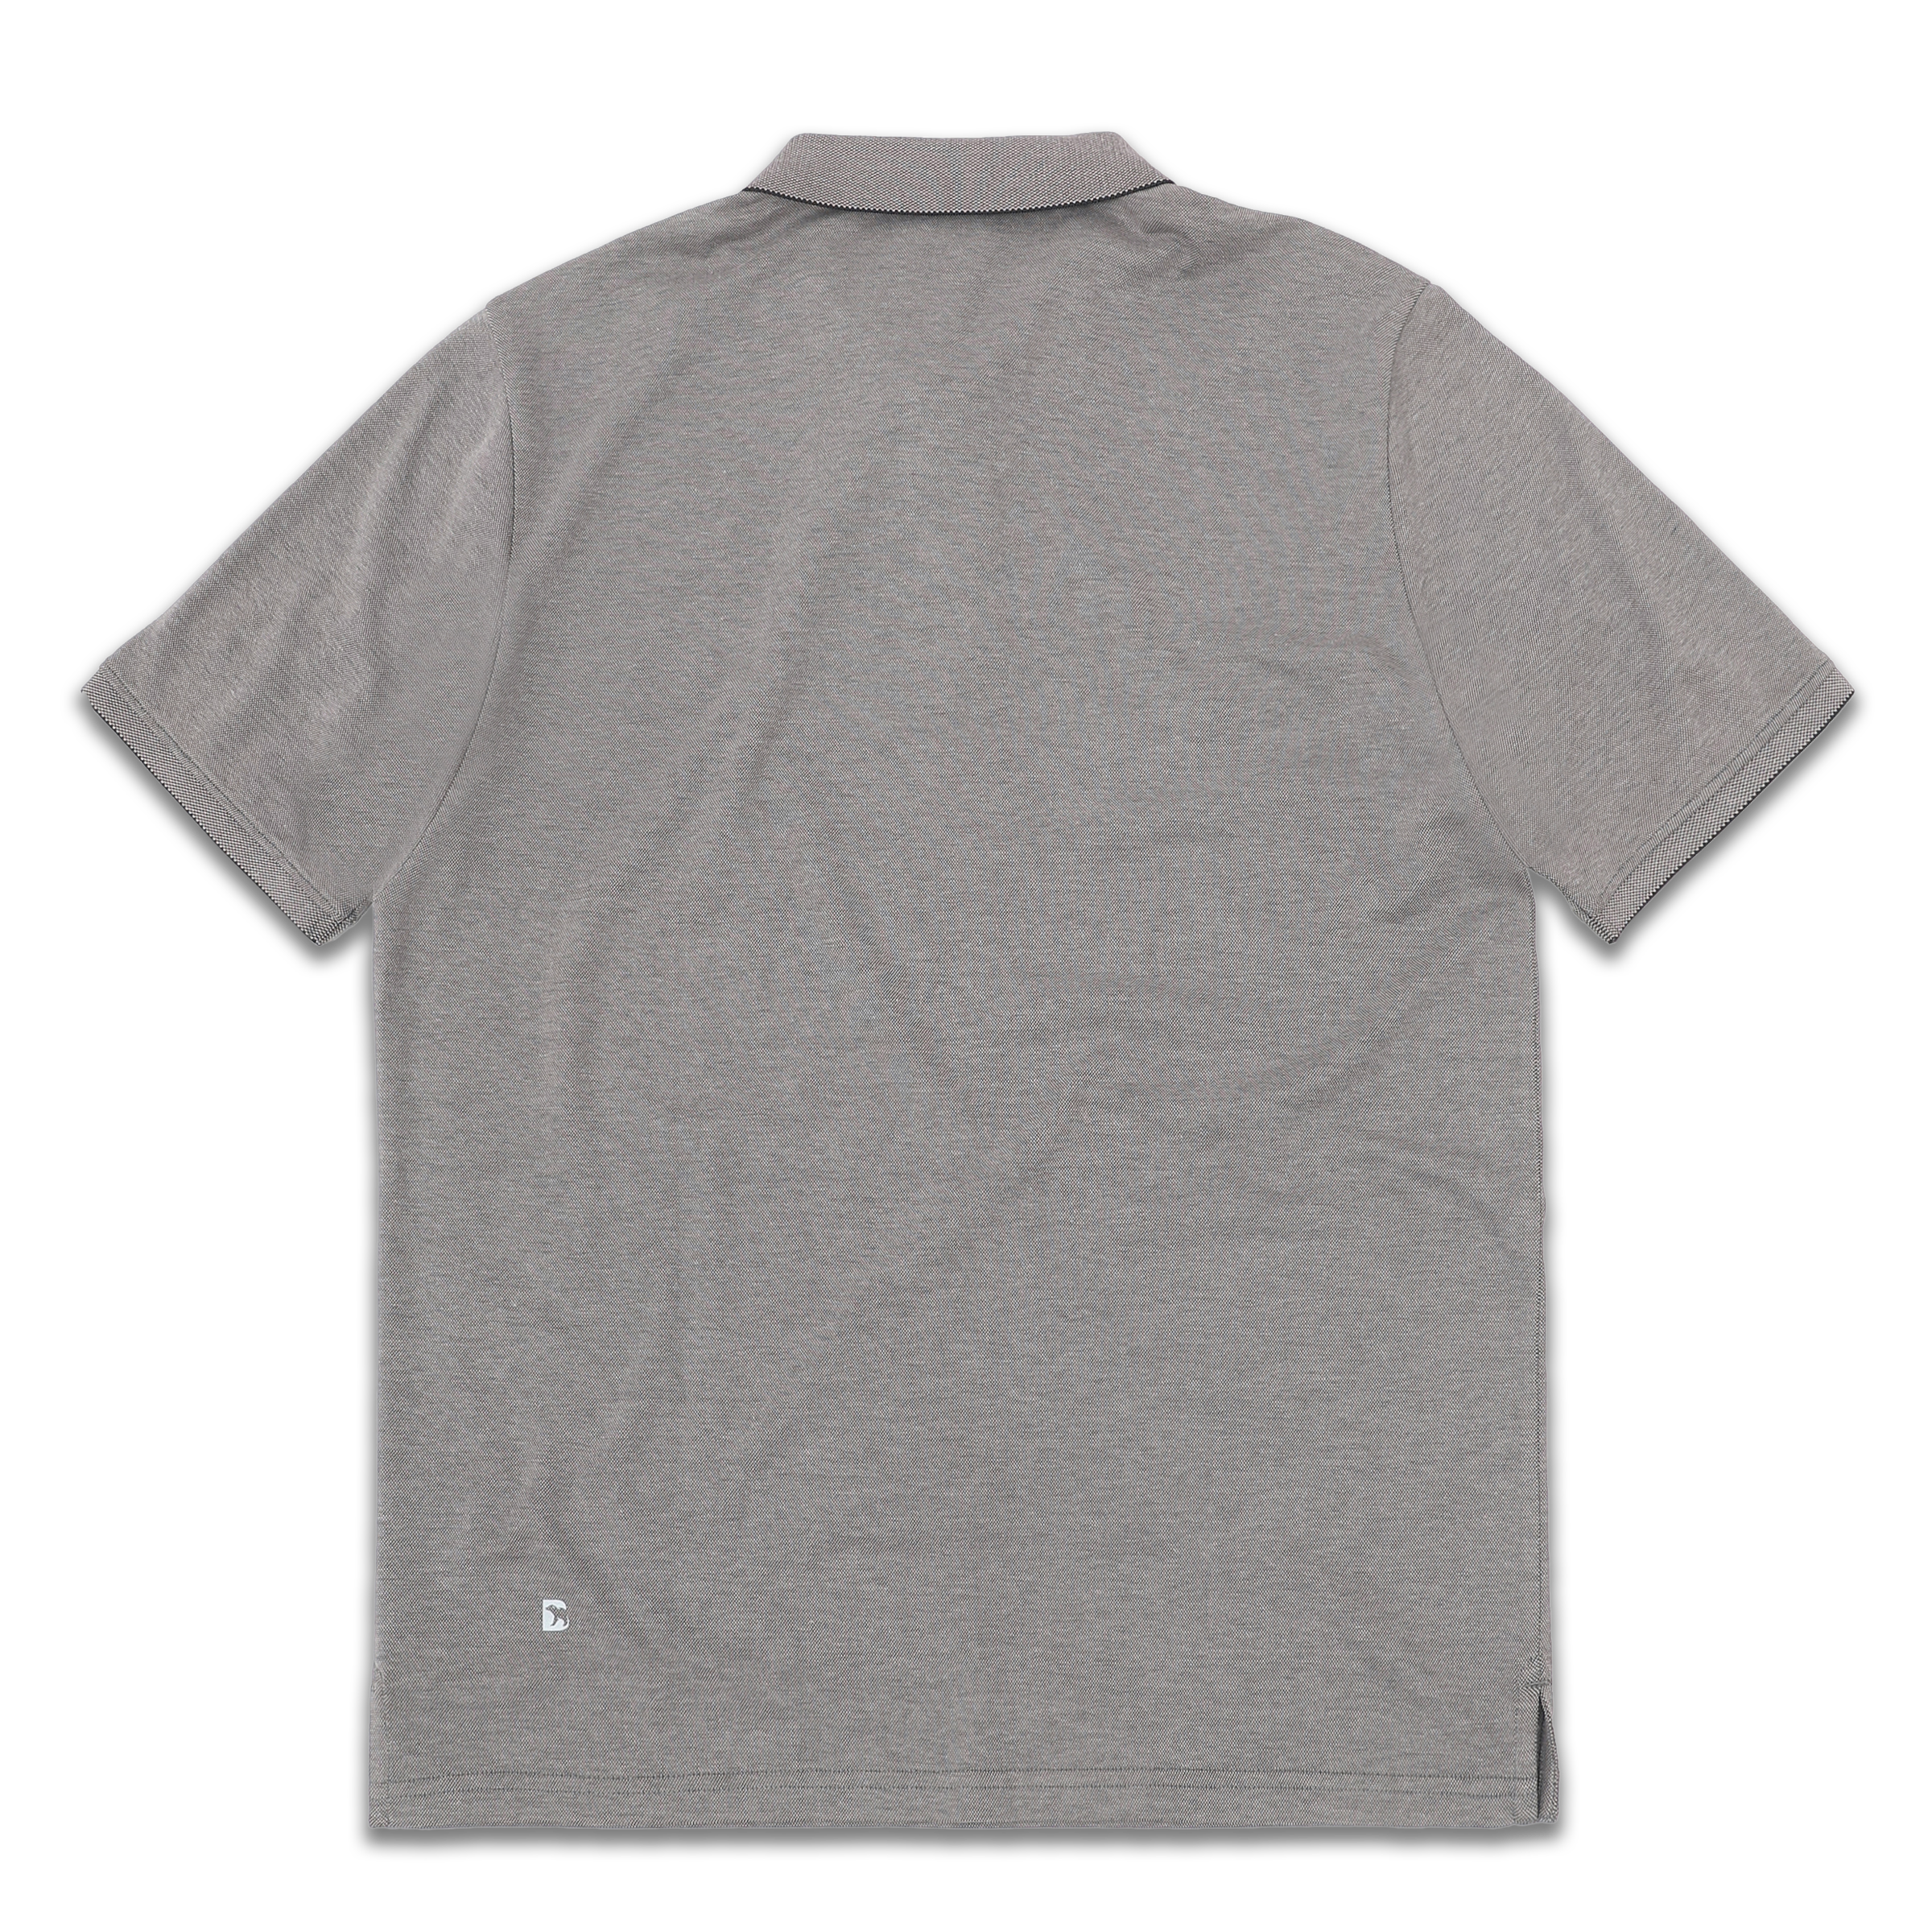 Range Polo Charcoal back with ribbed collar, ribbed short sleeves, and Bearbottom B logo in bottom left corner